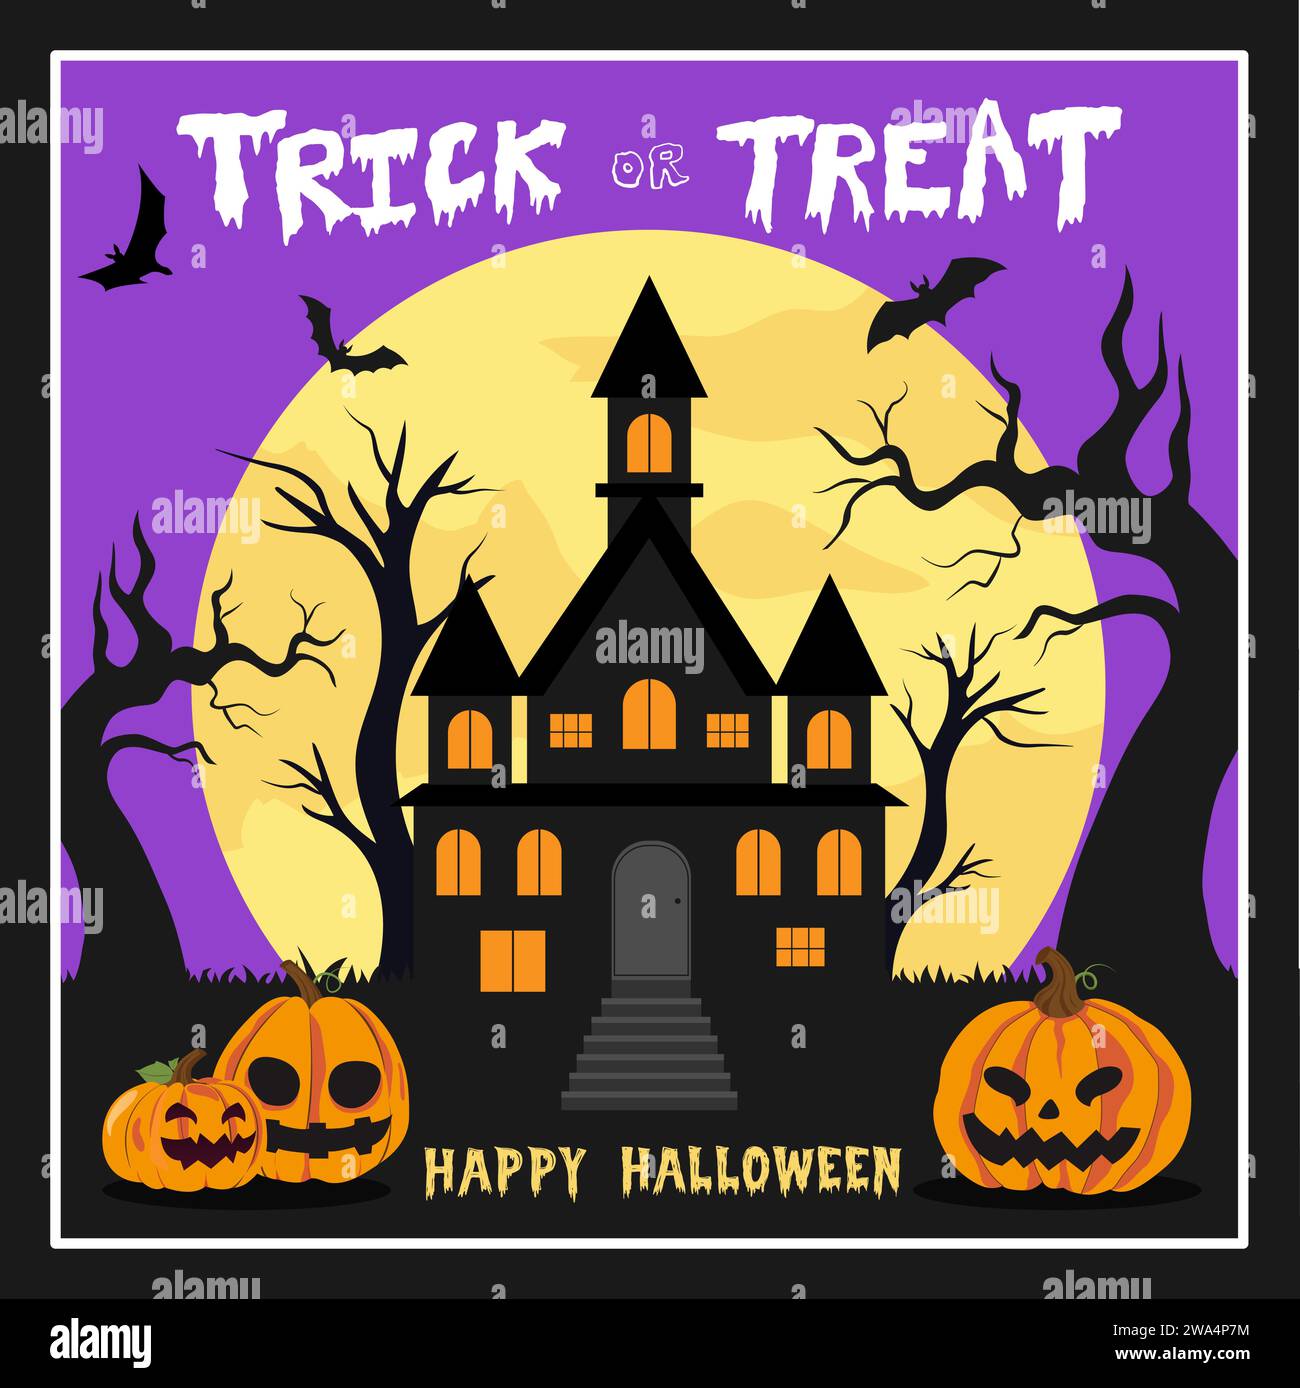 Halloween poster cover design with haunted house silhouette and jack-o-lantern pumpkins, vector illustration Stock Vector